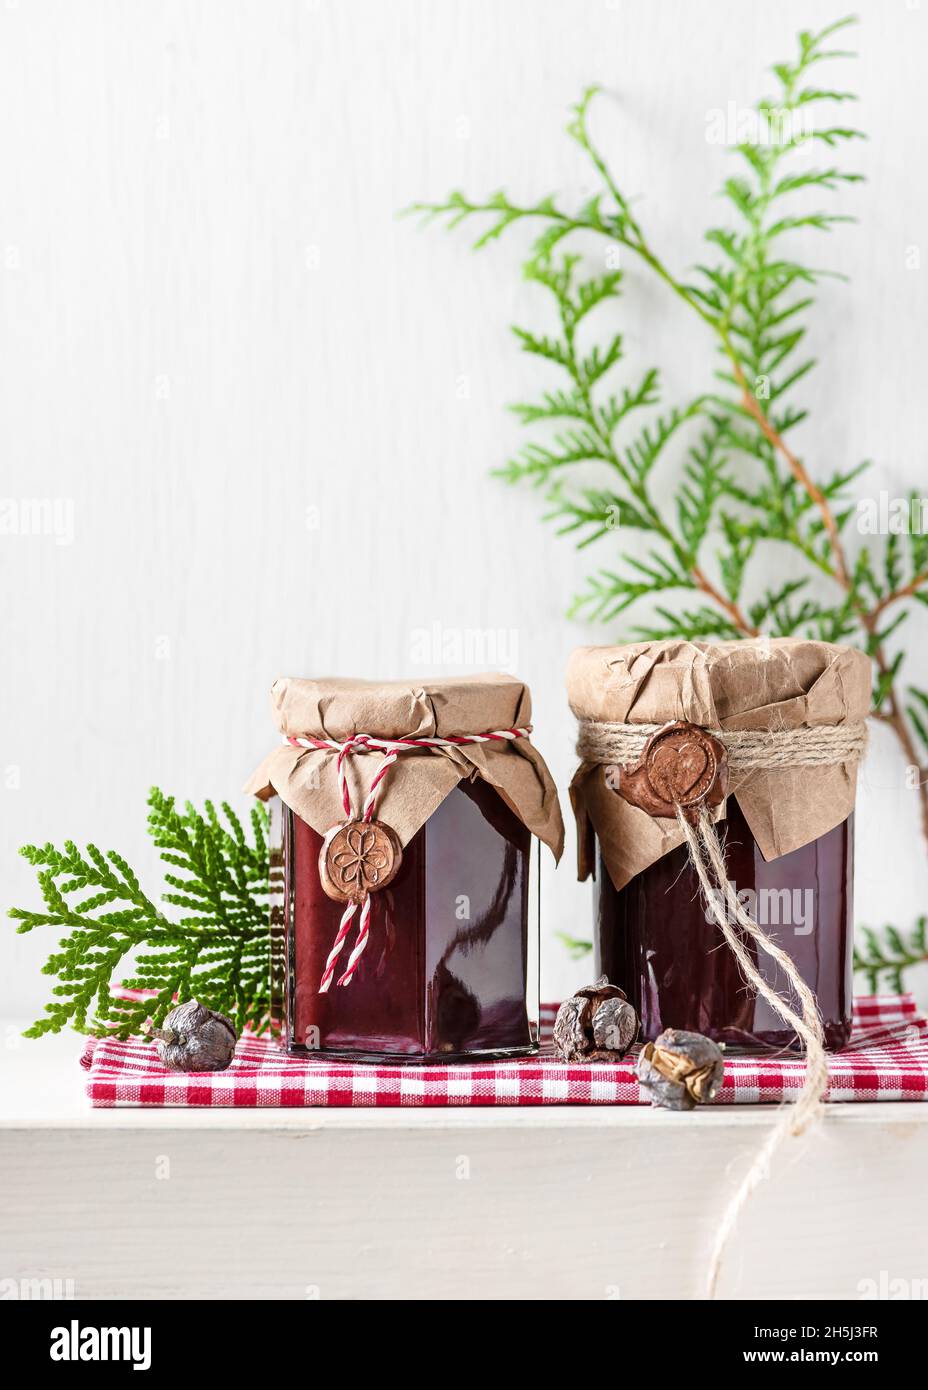 Homemade fruit jam in the glas jars decorated with grunge paper and wax seal as small present for Christmas. Kitchen gift ideas concept. Copy space. Stock Photo